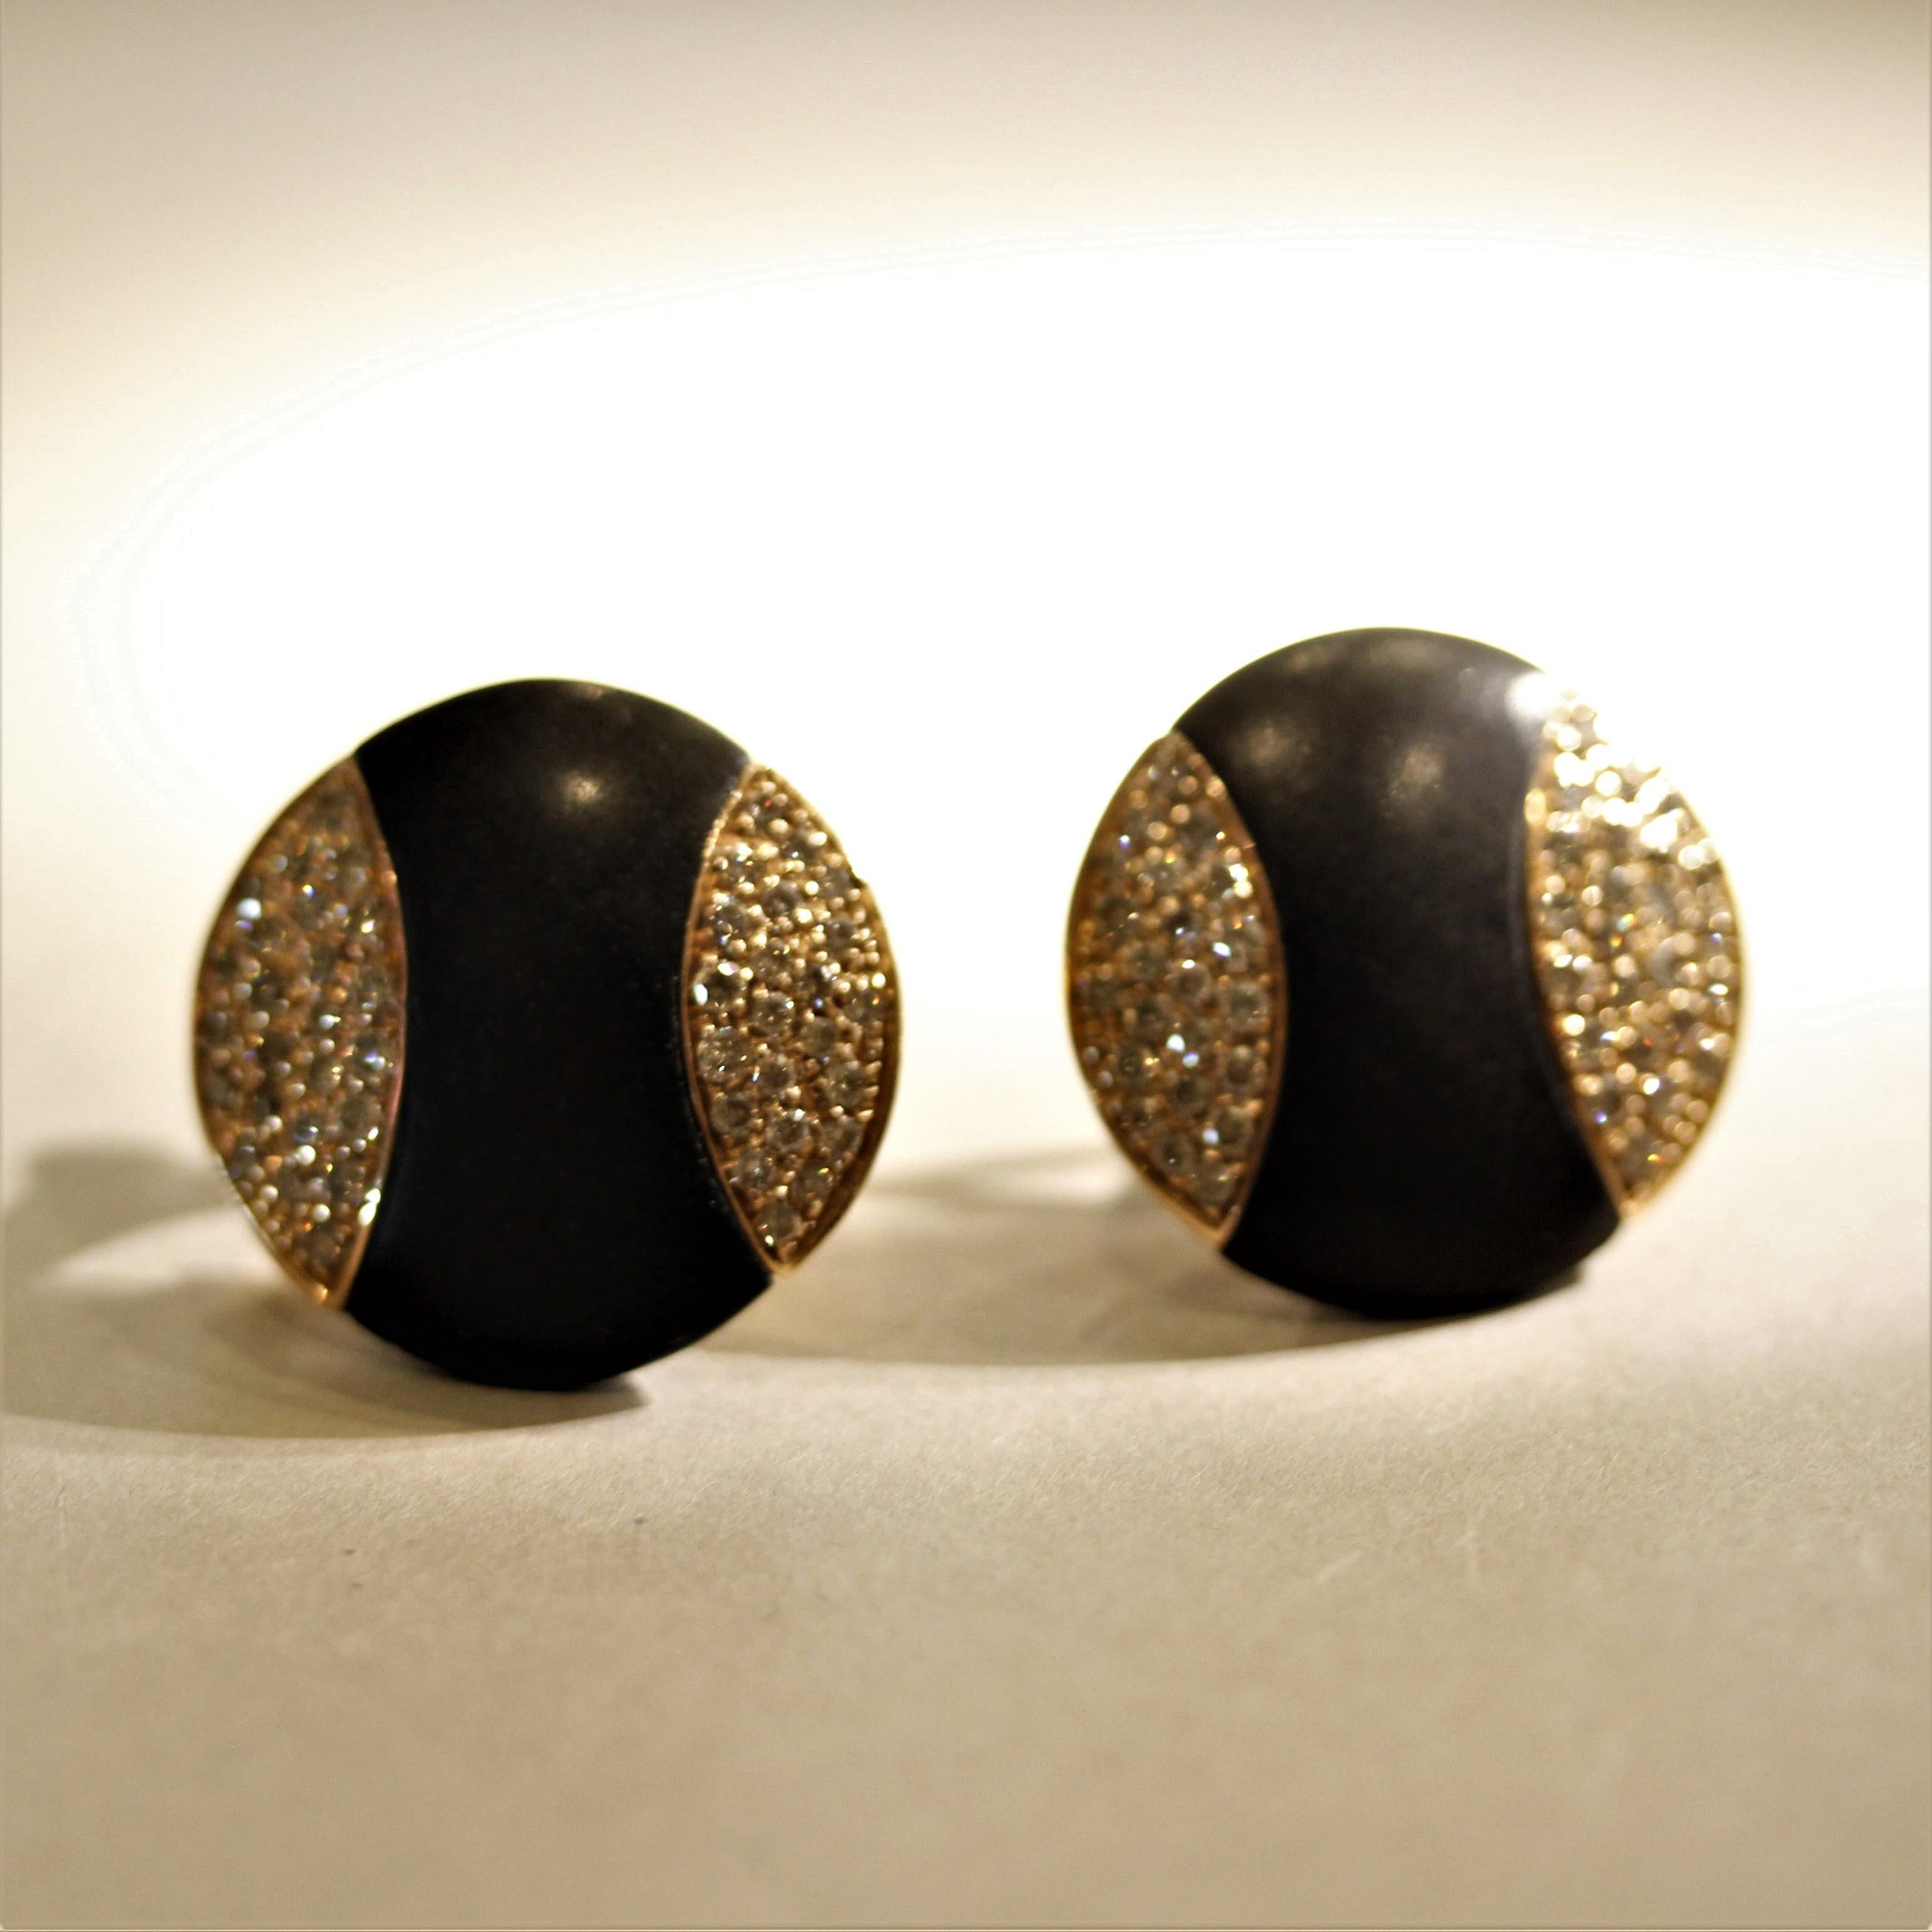 A unique and stylish pair of earrings! They feature 15 carats of natural black coral which are sandwiches between diamonds weighing 1.22 carats and cut as round brilliants. Set in 18k rose gold, these fun stylish earrings will complement any